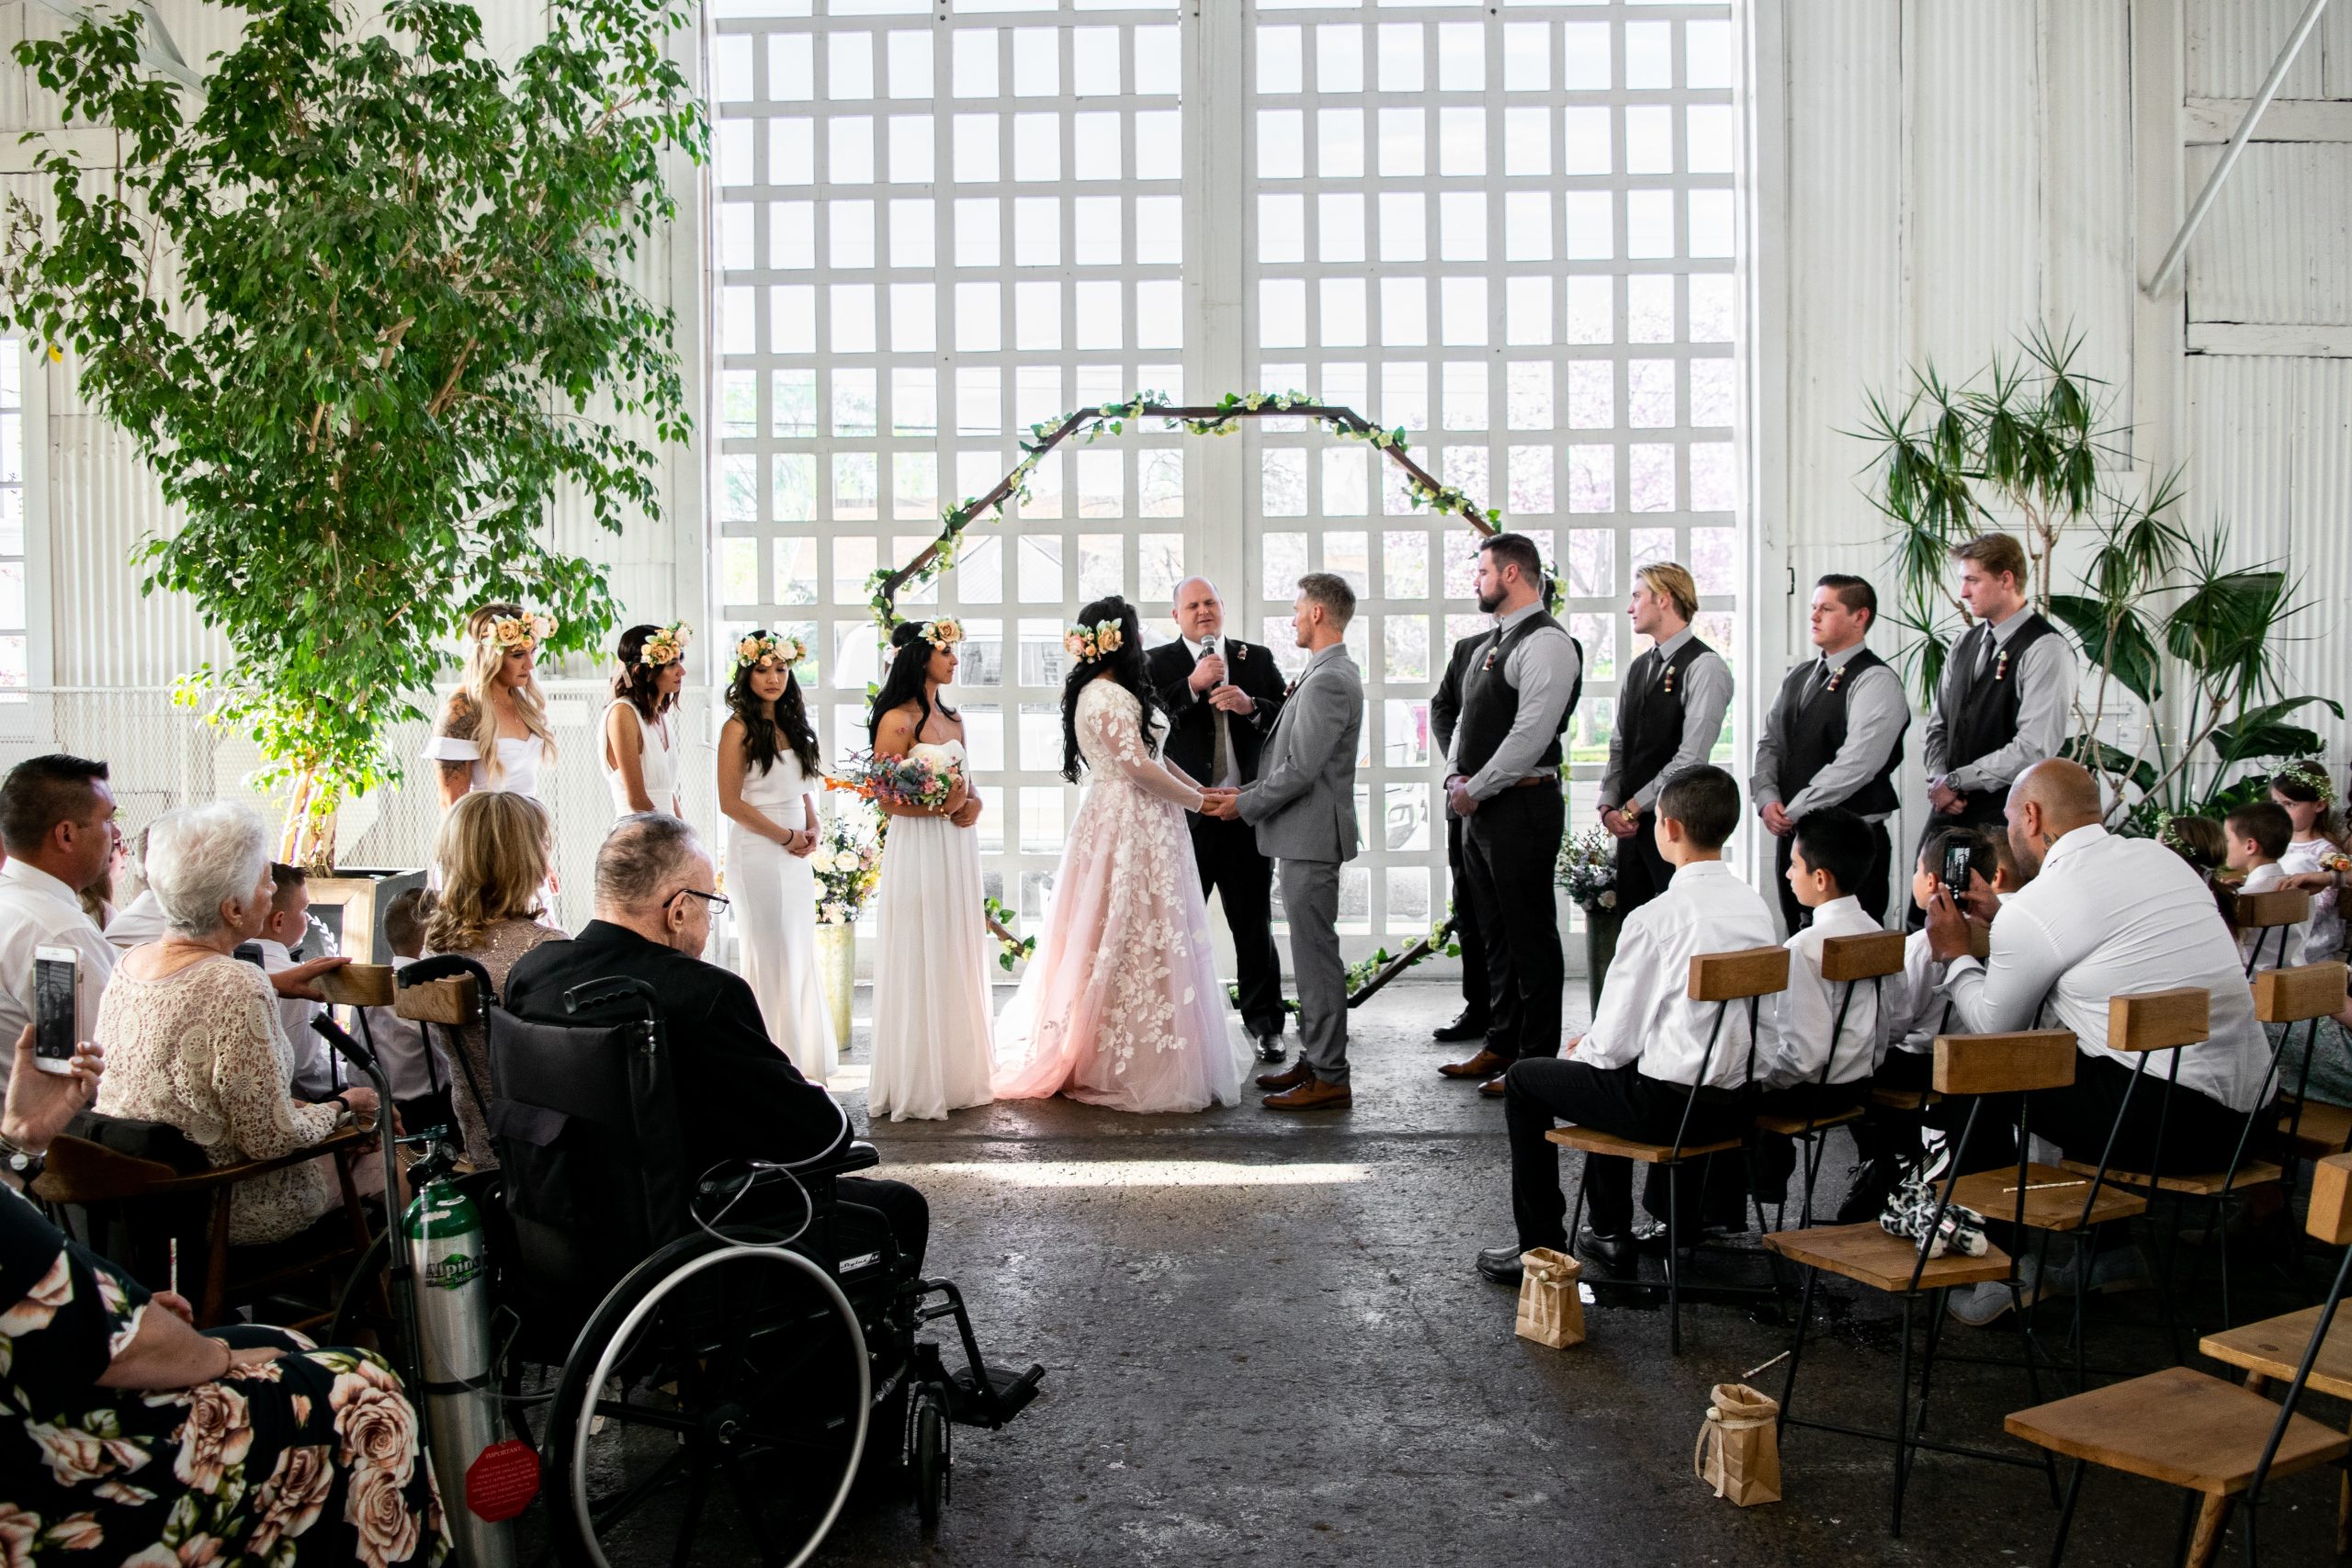 A wedding with a man in a wheelchair at the front of the crowd